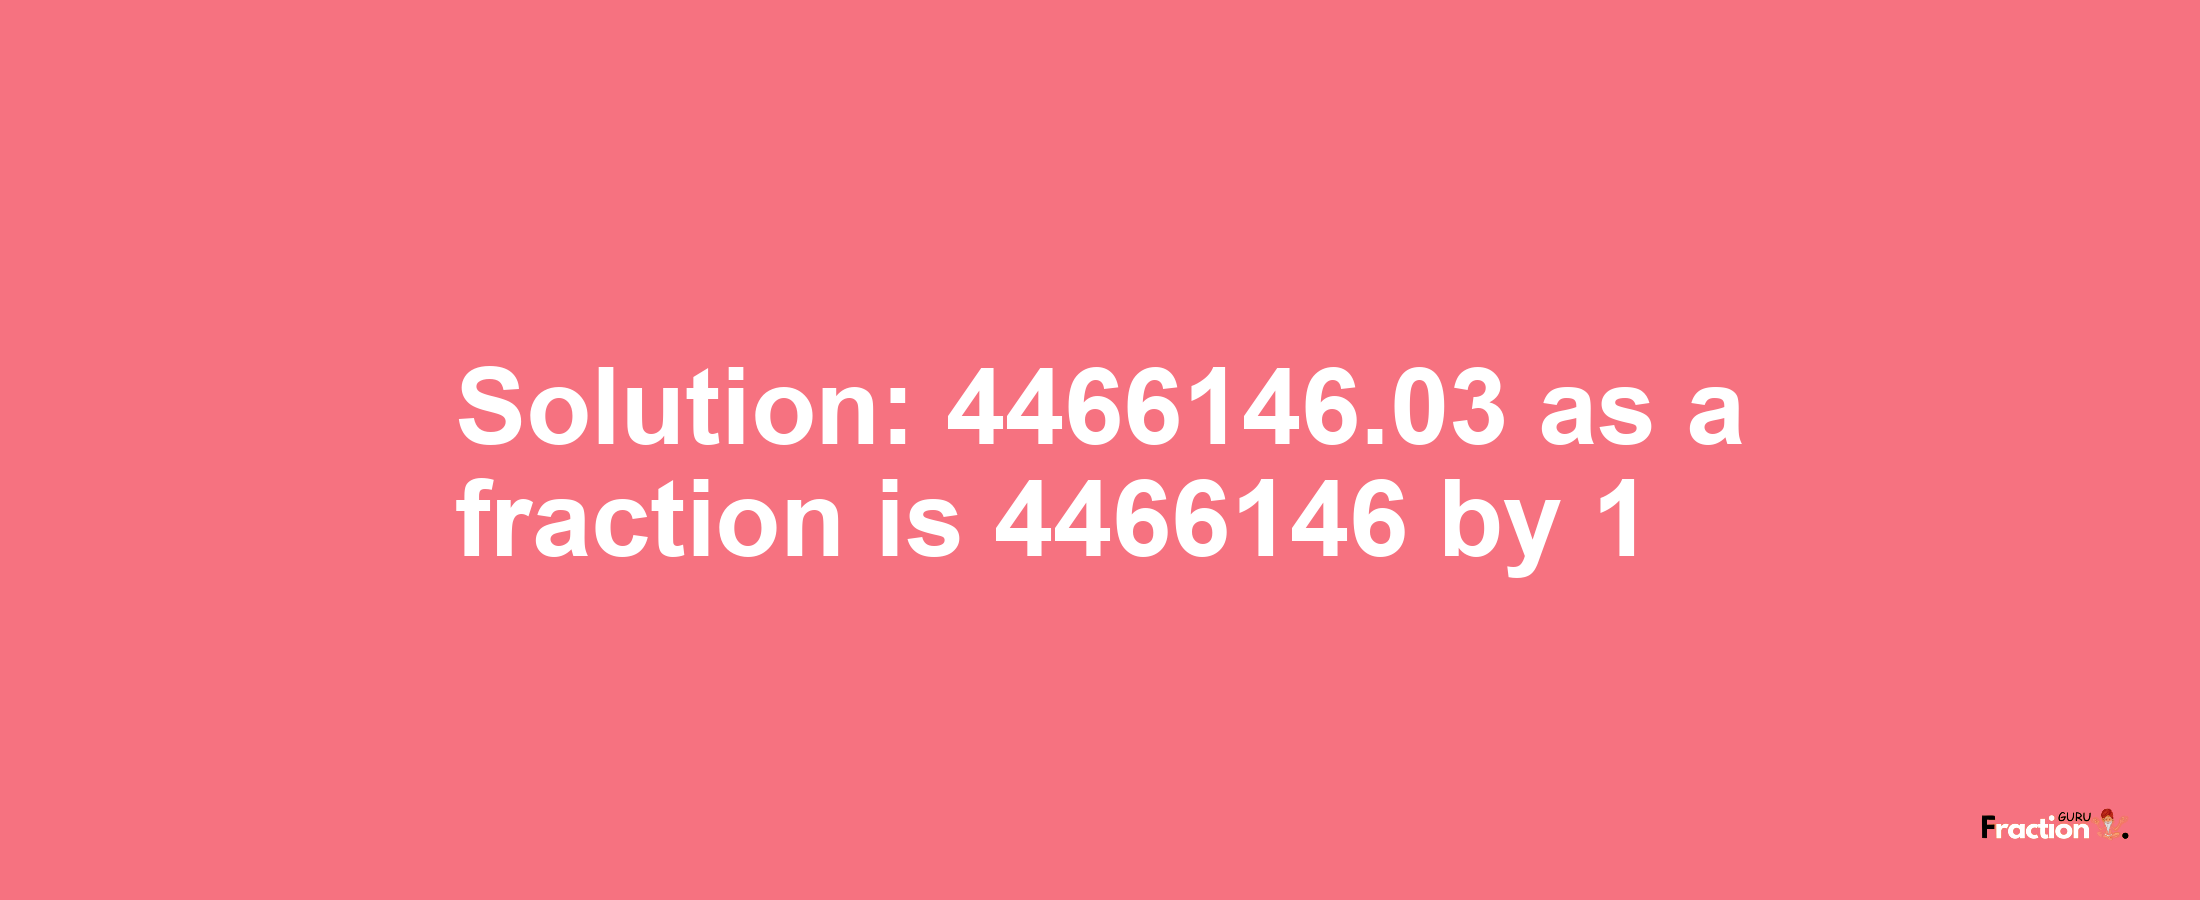 Solution:4466146.03 as a fraction is 4466146/1